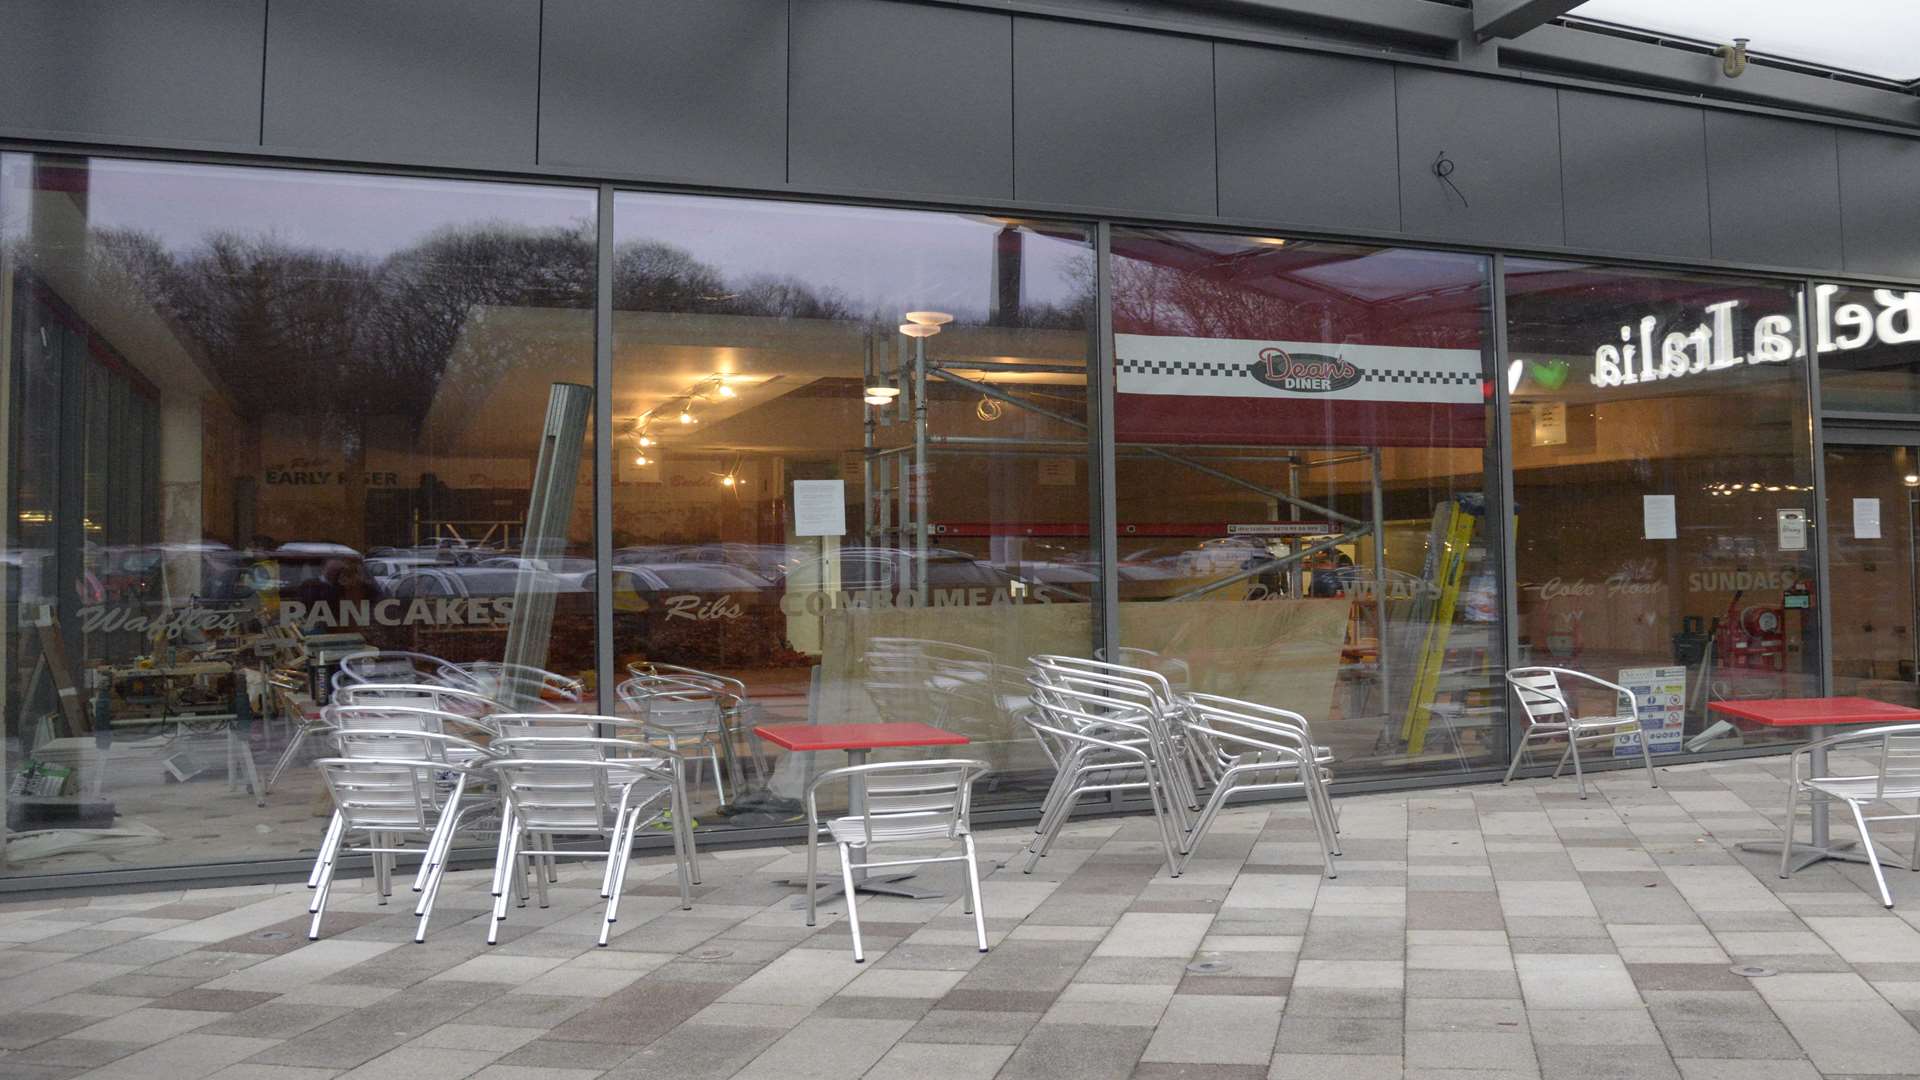 The former Dean's Diner at Hempstead Valley Shopping Centre